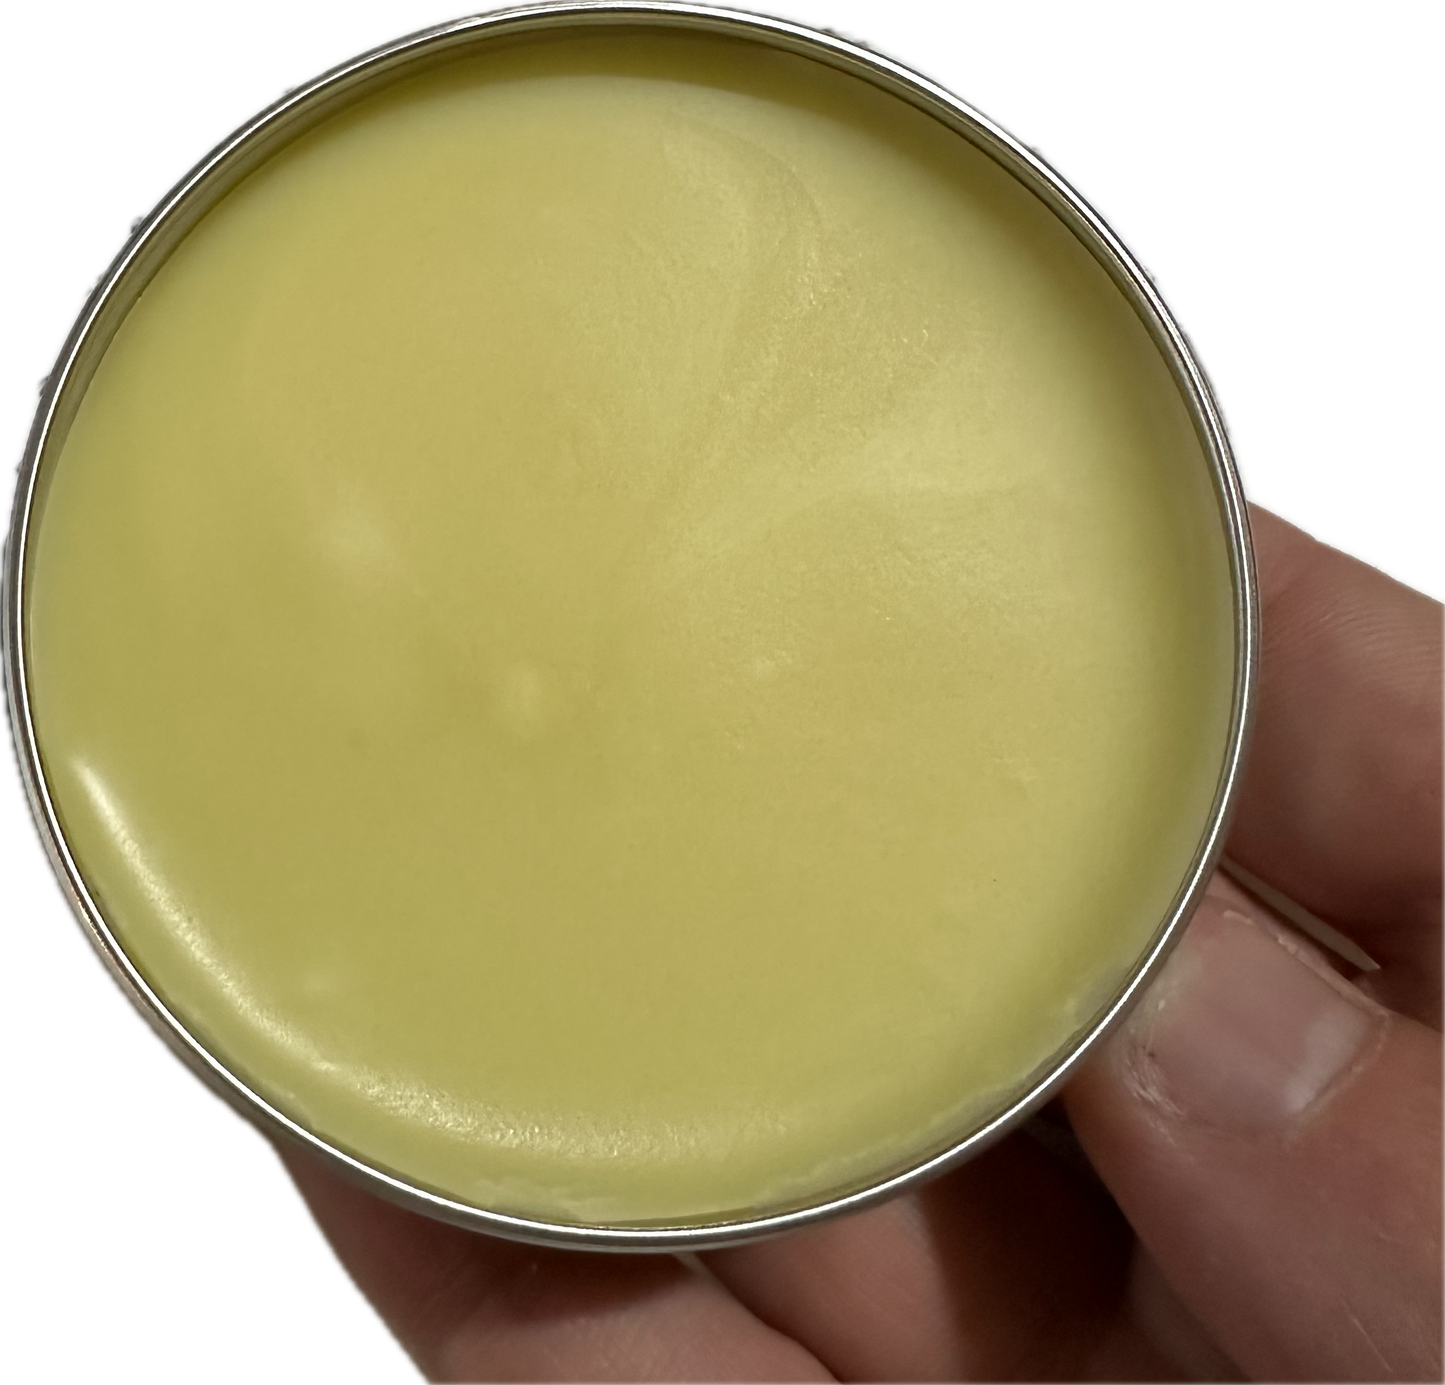 F-Balm - Anti-Aging Tallow Balm - Black Label (UNSCENTED)